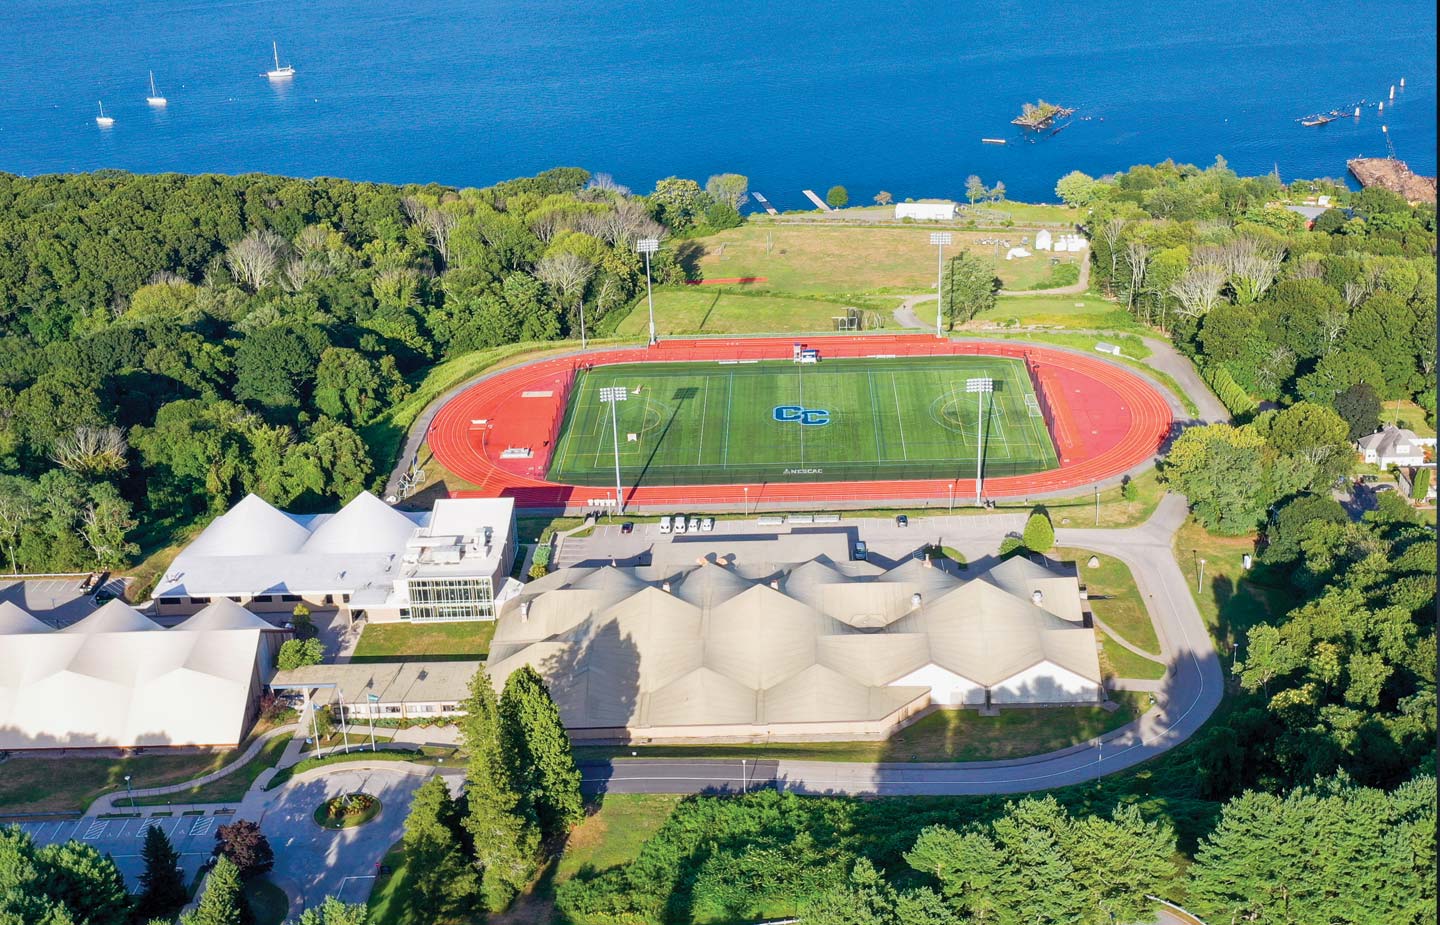 Aerial view of the campus waterfront on the Thames River